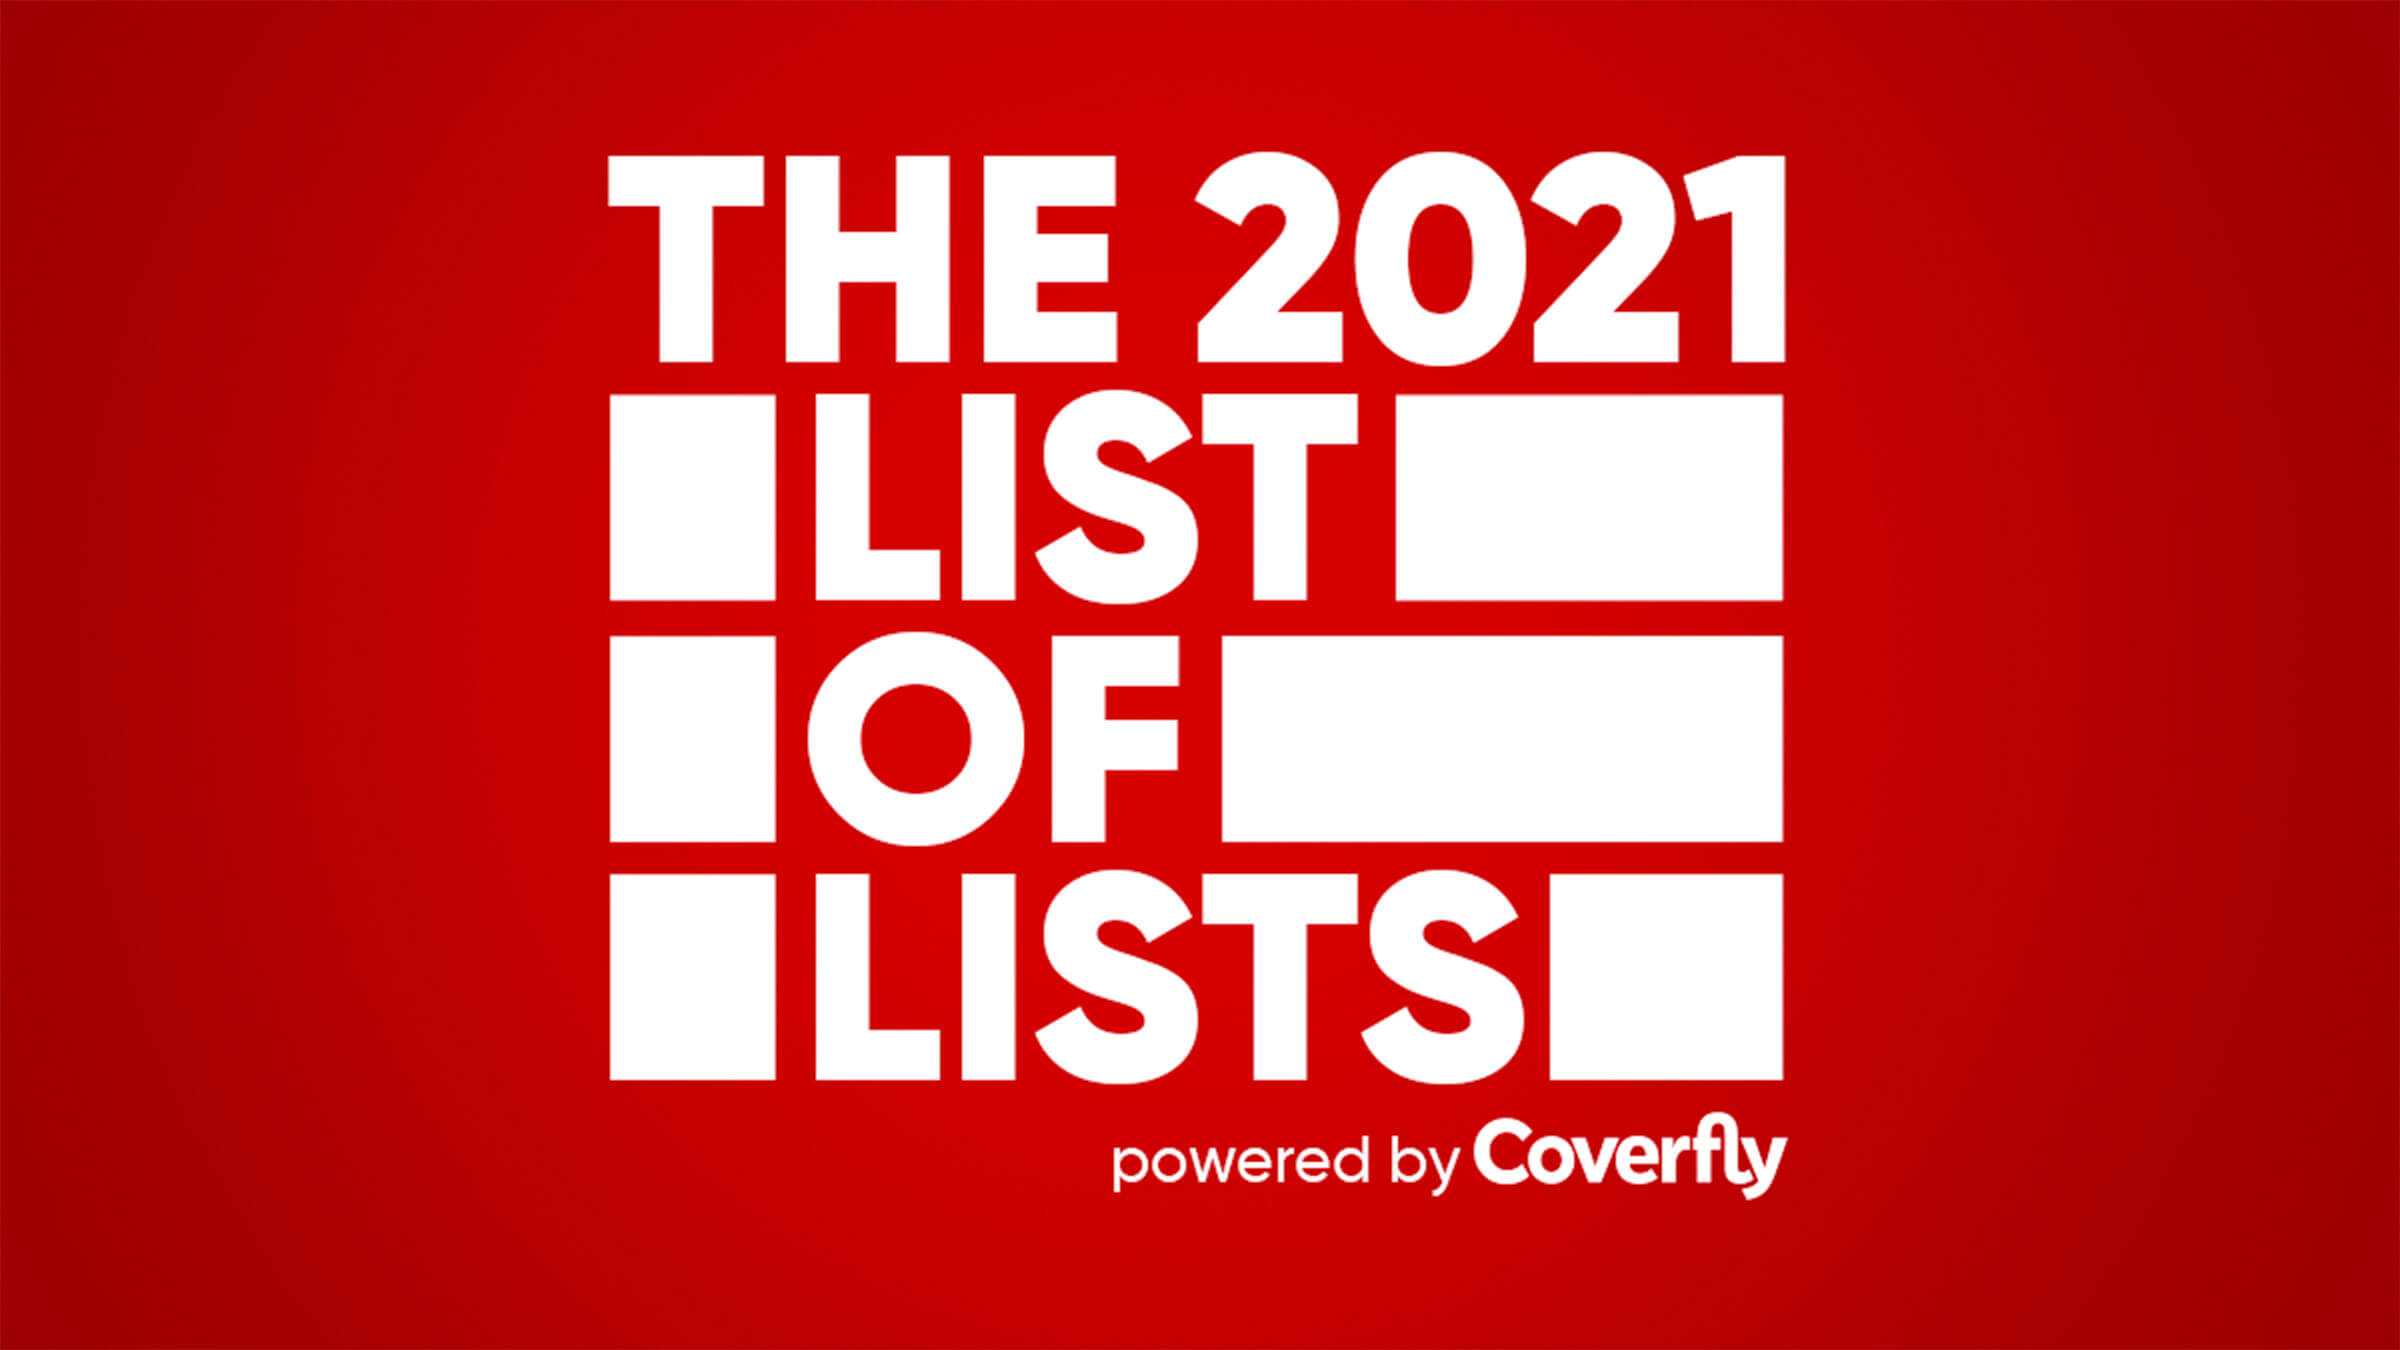 List of Lists: Where Are the 2021 Writers Now?